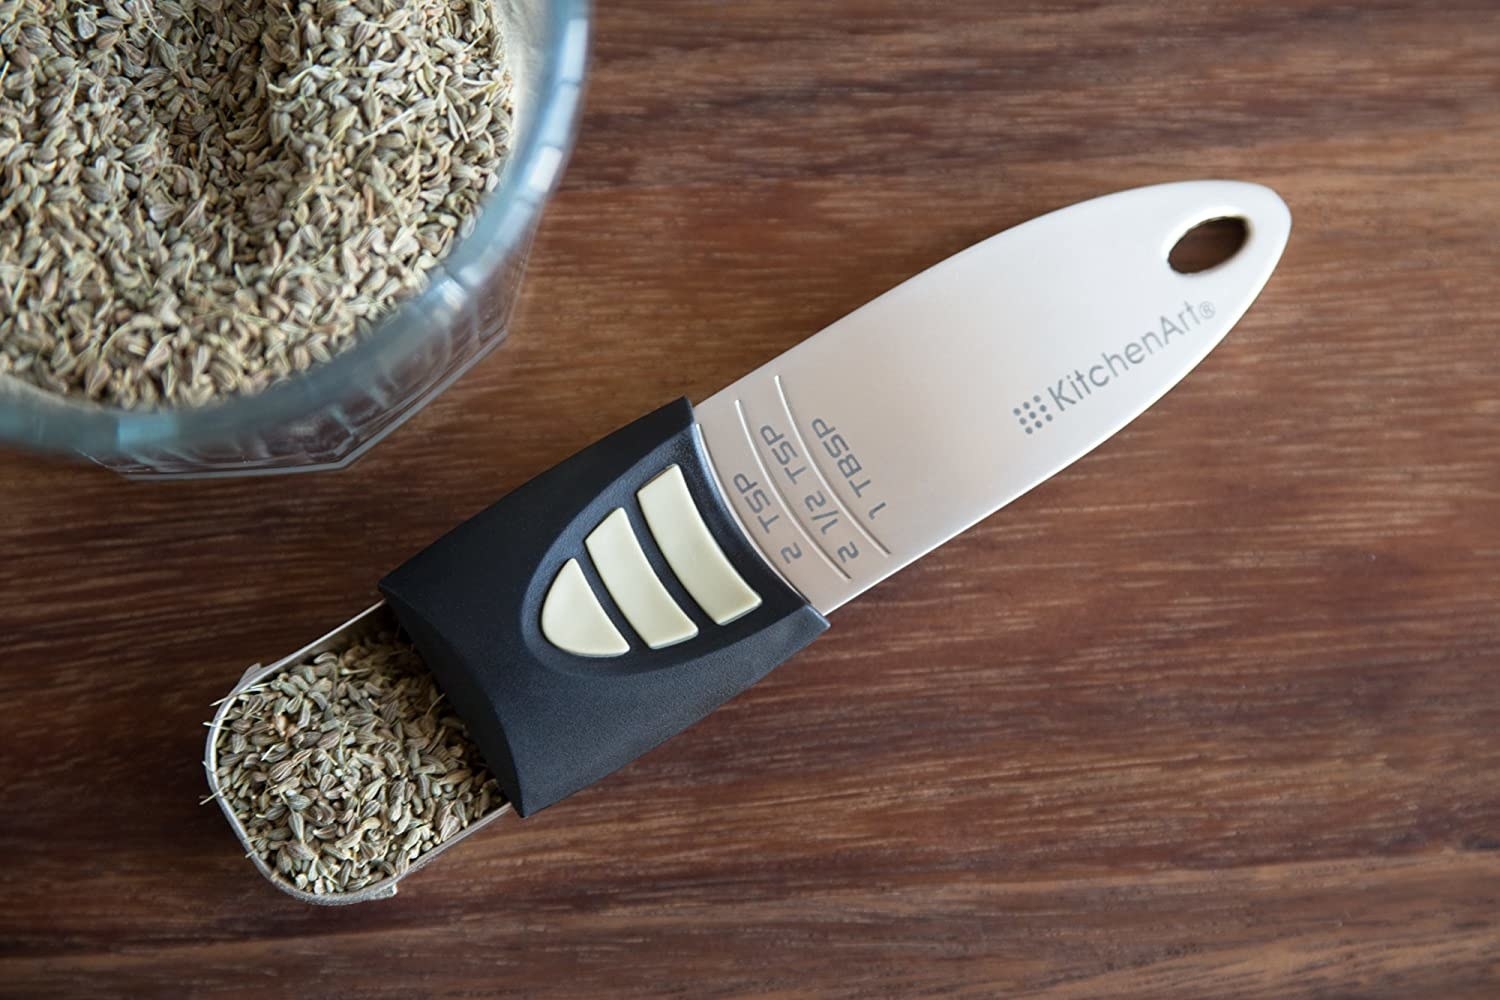 The measuring spoon with herbs on it